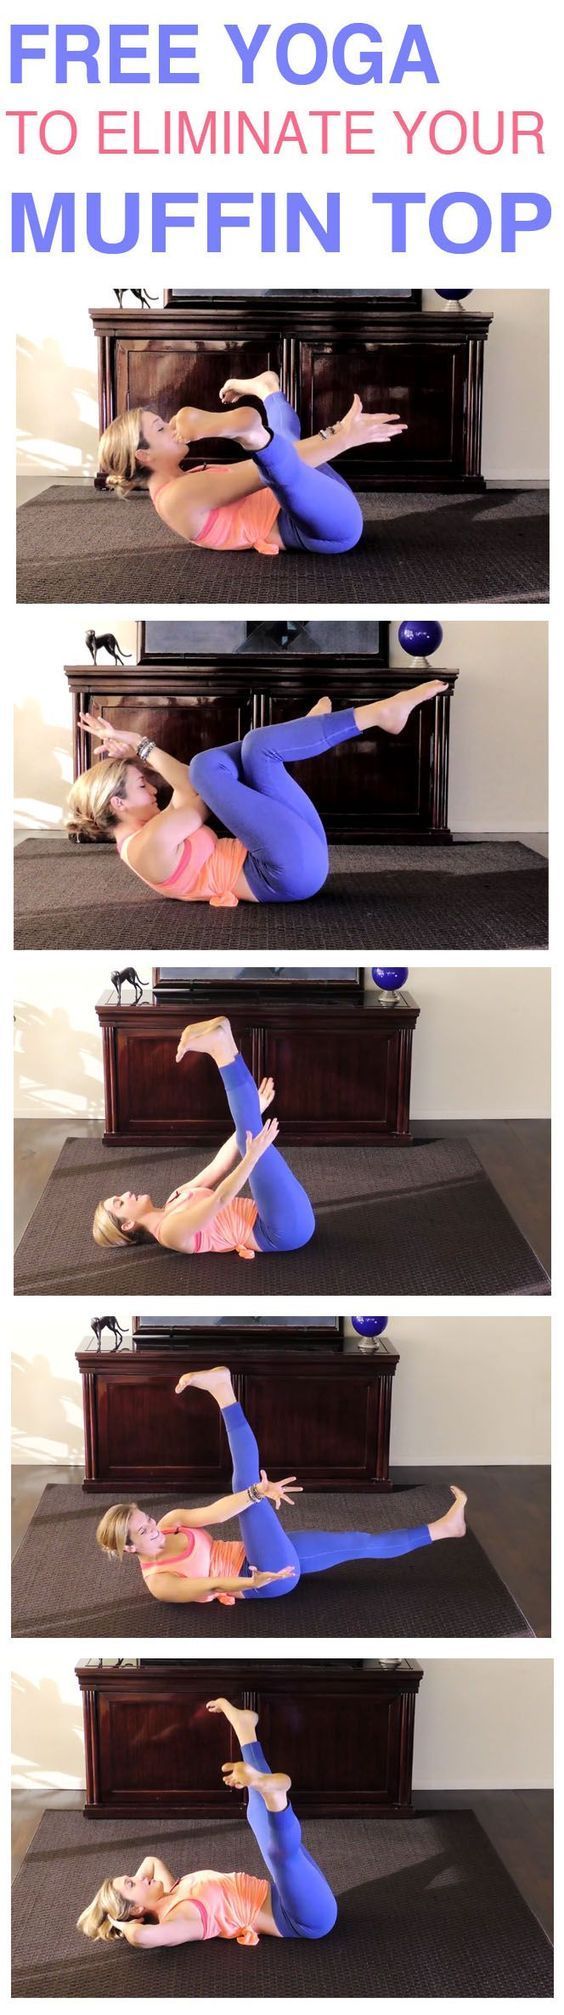 DownDog Yoga Poses for Fun & Fitness: Yoga to Eliminate Your Muffin Top